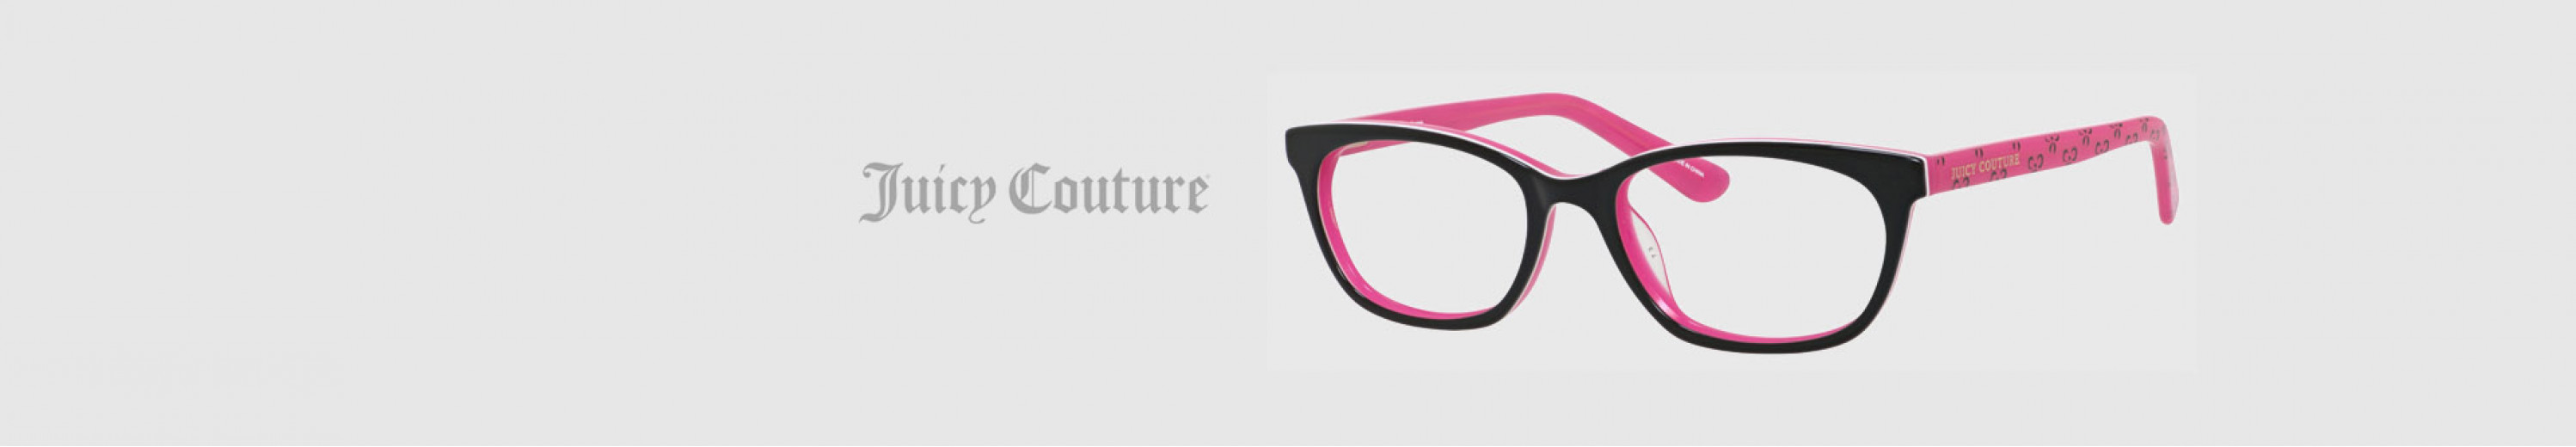 Juicy Couture Eyeglasses for Kids